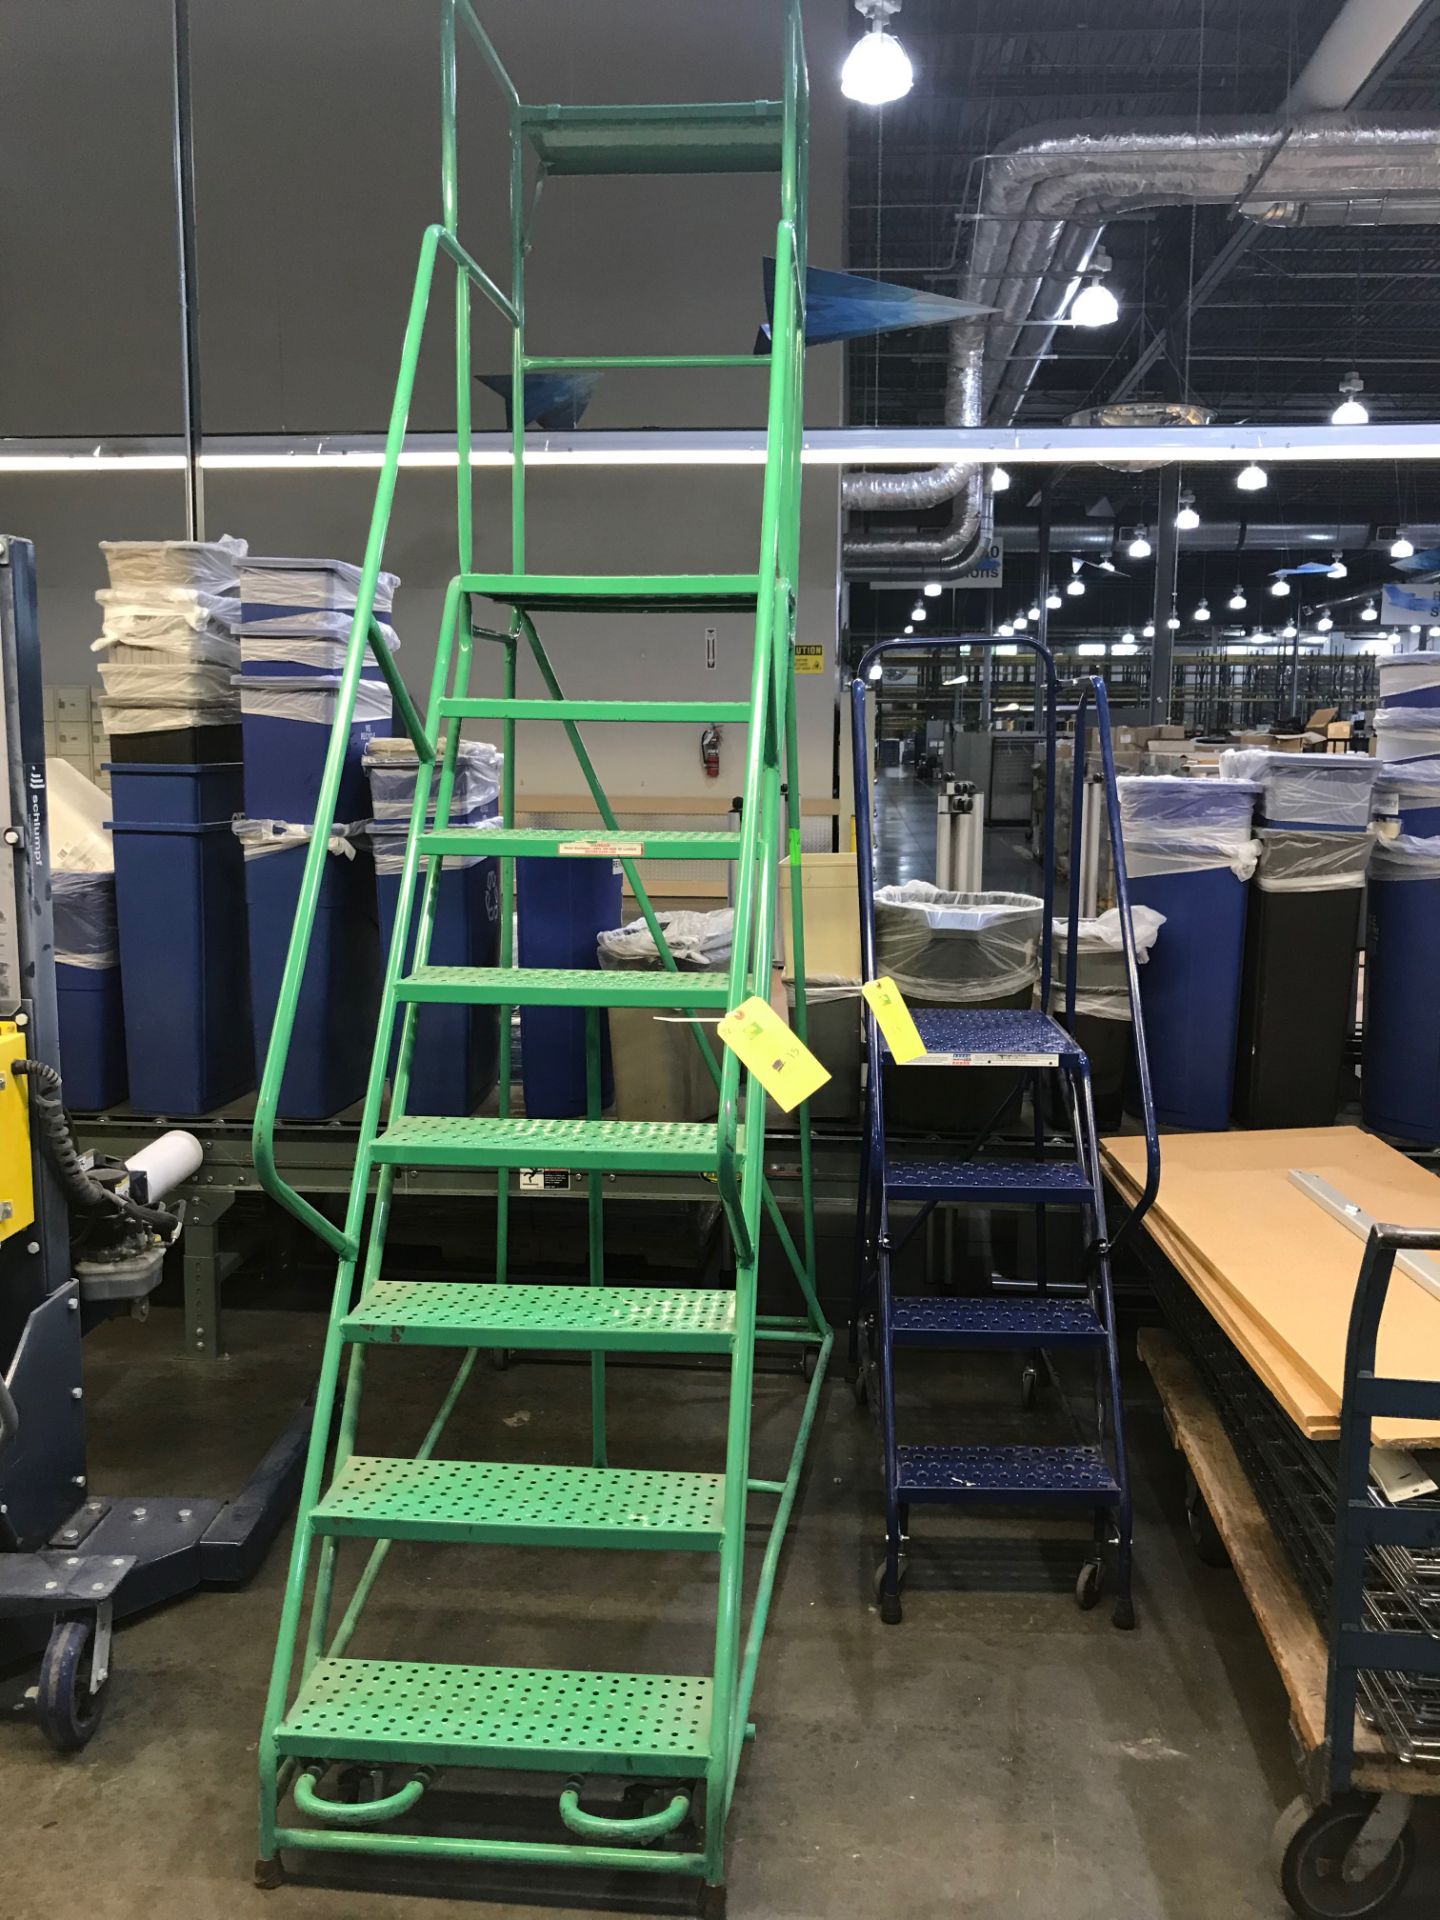 (2) Cotterman Ladders, 75 in tall and 38 in tall, Removal Fee: $25